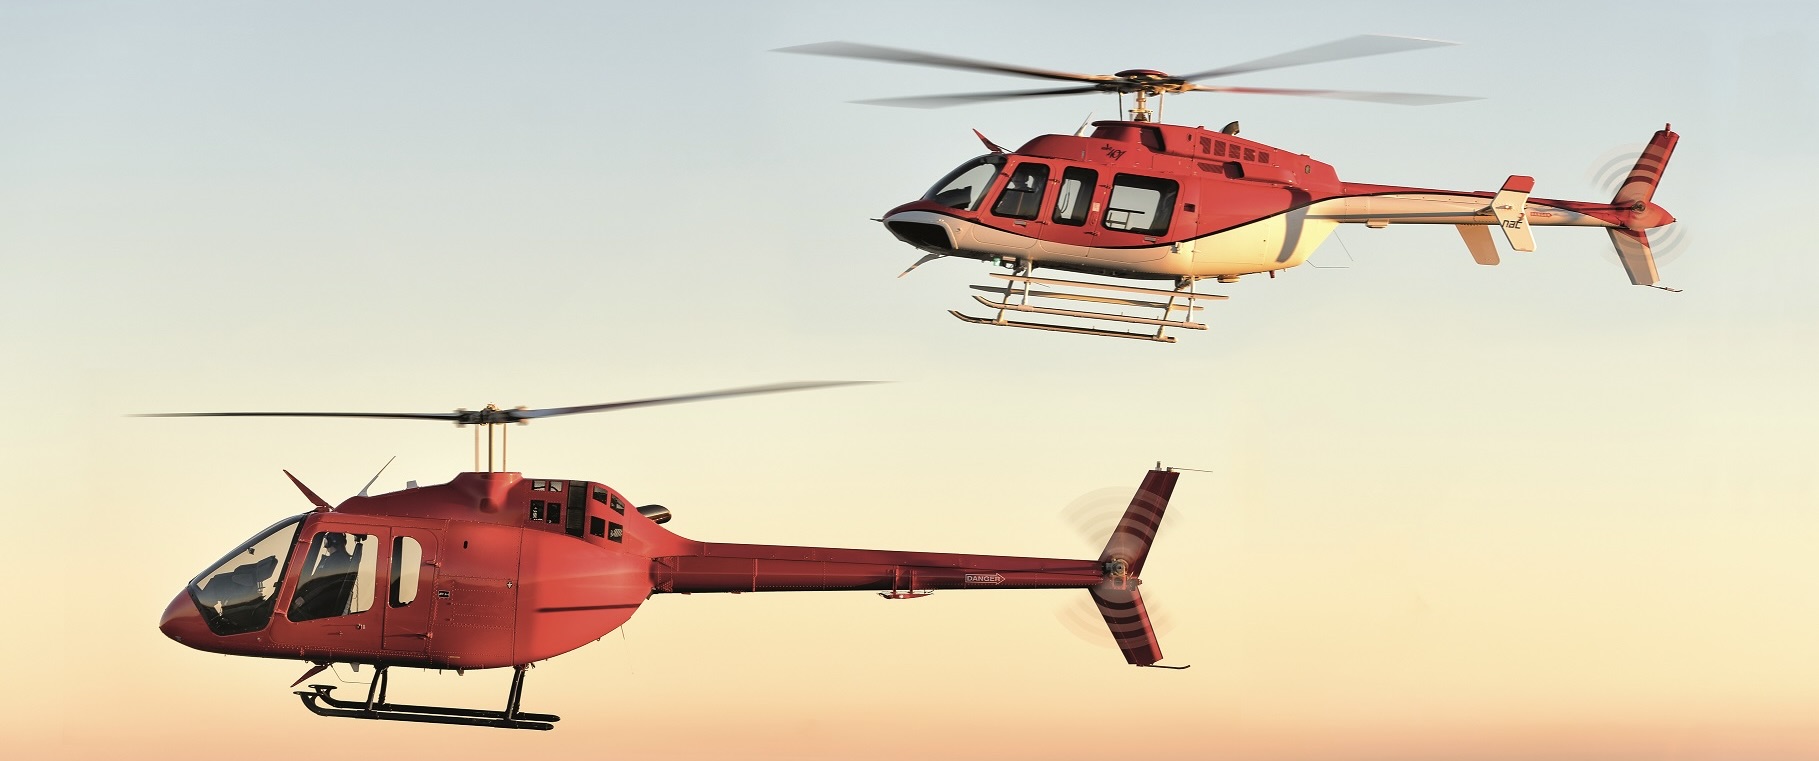 Meghna Aviation doubles Bell fleet with latest order